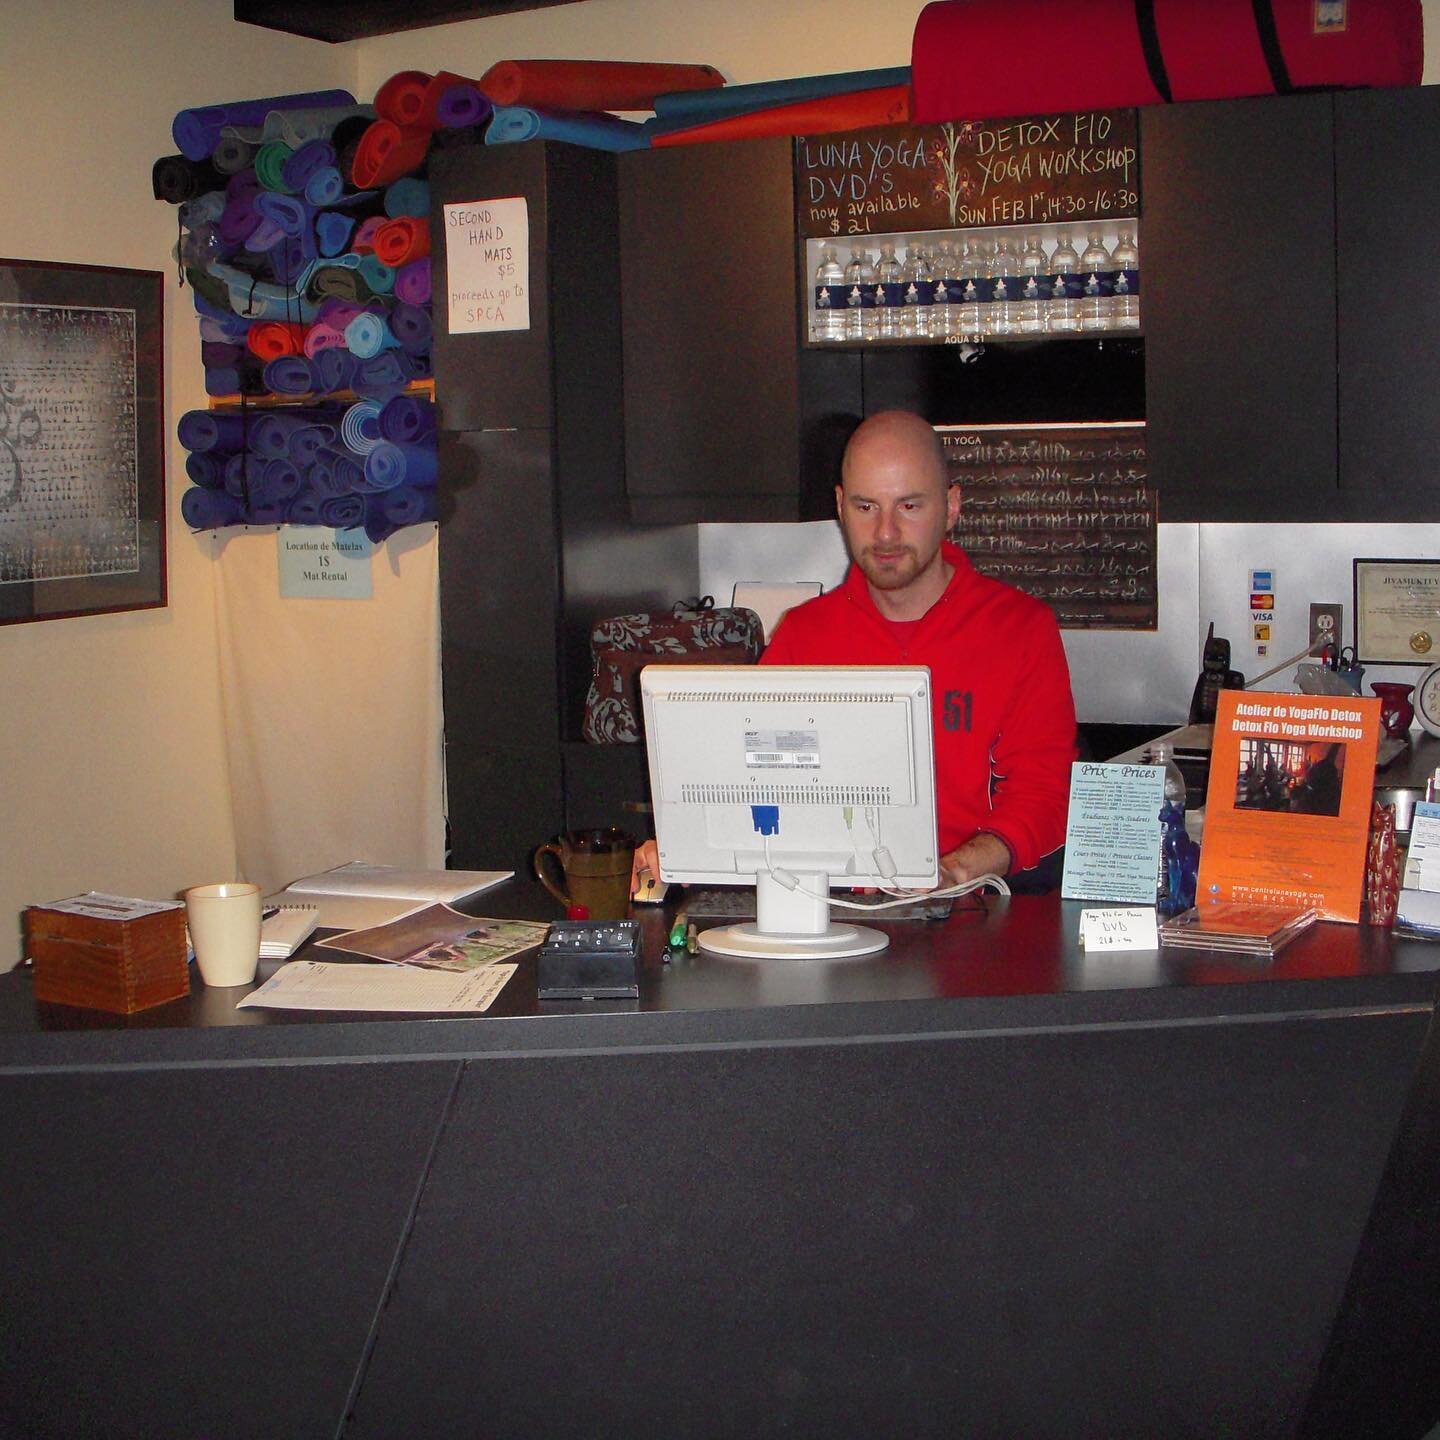 🥰Remember this guy? That is one RED sweatshirt! Luna has changed a lot (check out that reception desk!) but so much hasn&rsquo;t, including the amazing people who make up this community ❣️It&rsquo;s the people who make up the heart of Luna. Somehow,